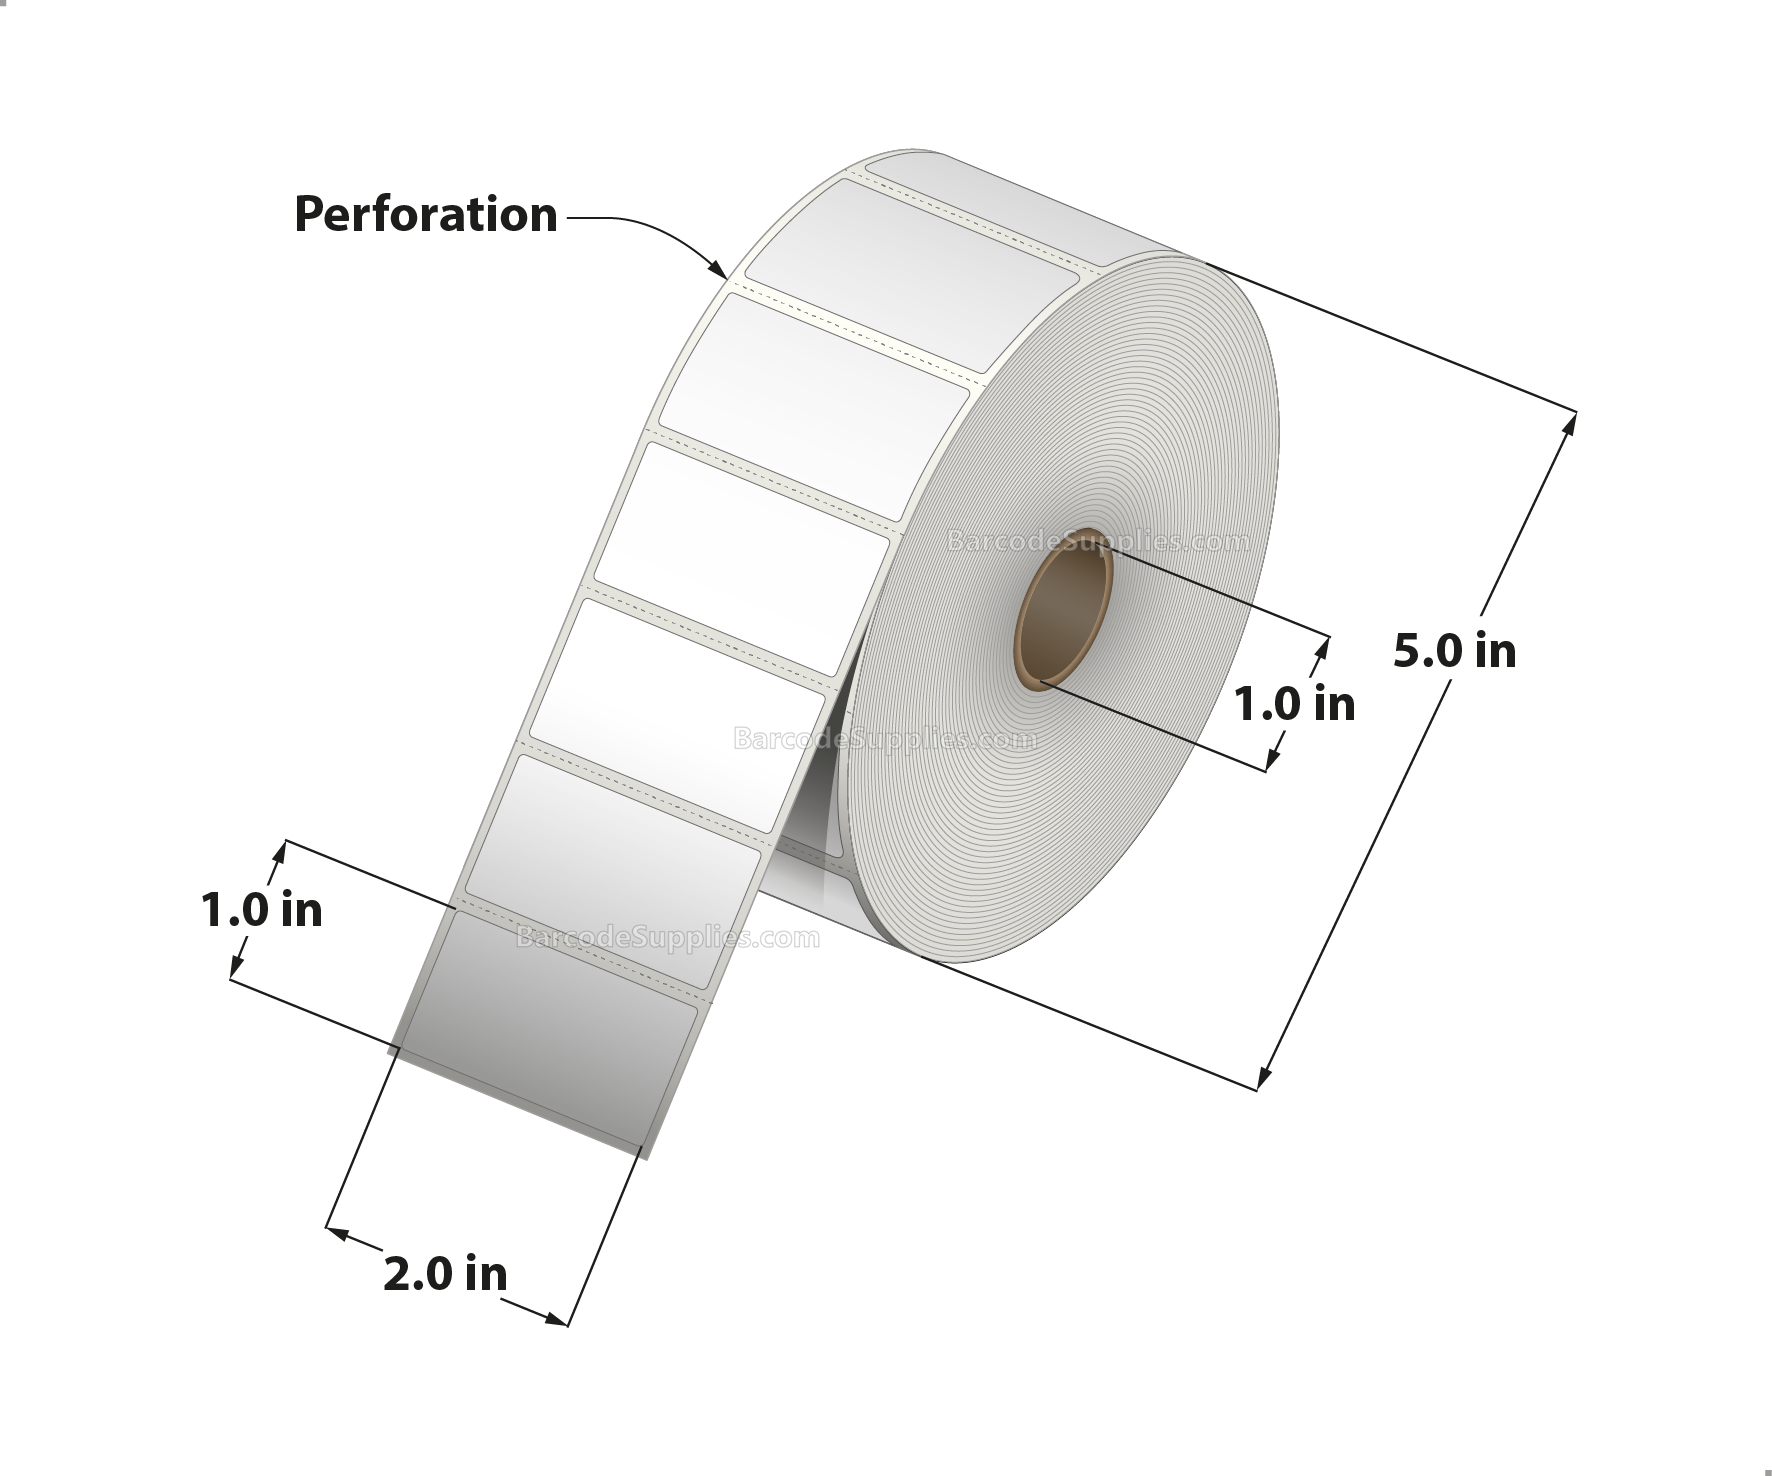 2 x 1 Direct Thermal White Labels With Permanent Acrylic Adhesive - Perforated - 2300 Labels Per Roll - Carton Of 4 Rolls - 9200 Labels Total - MPN: DT21-15PDT